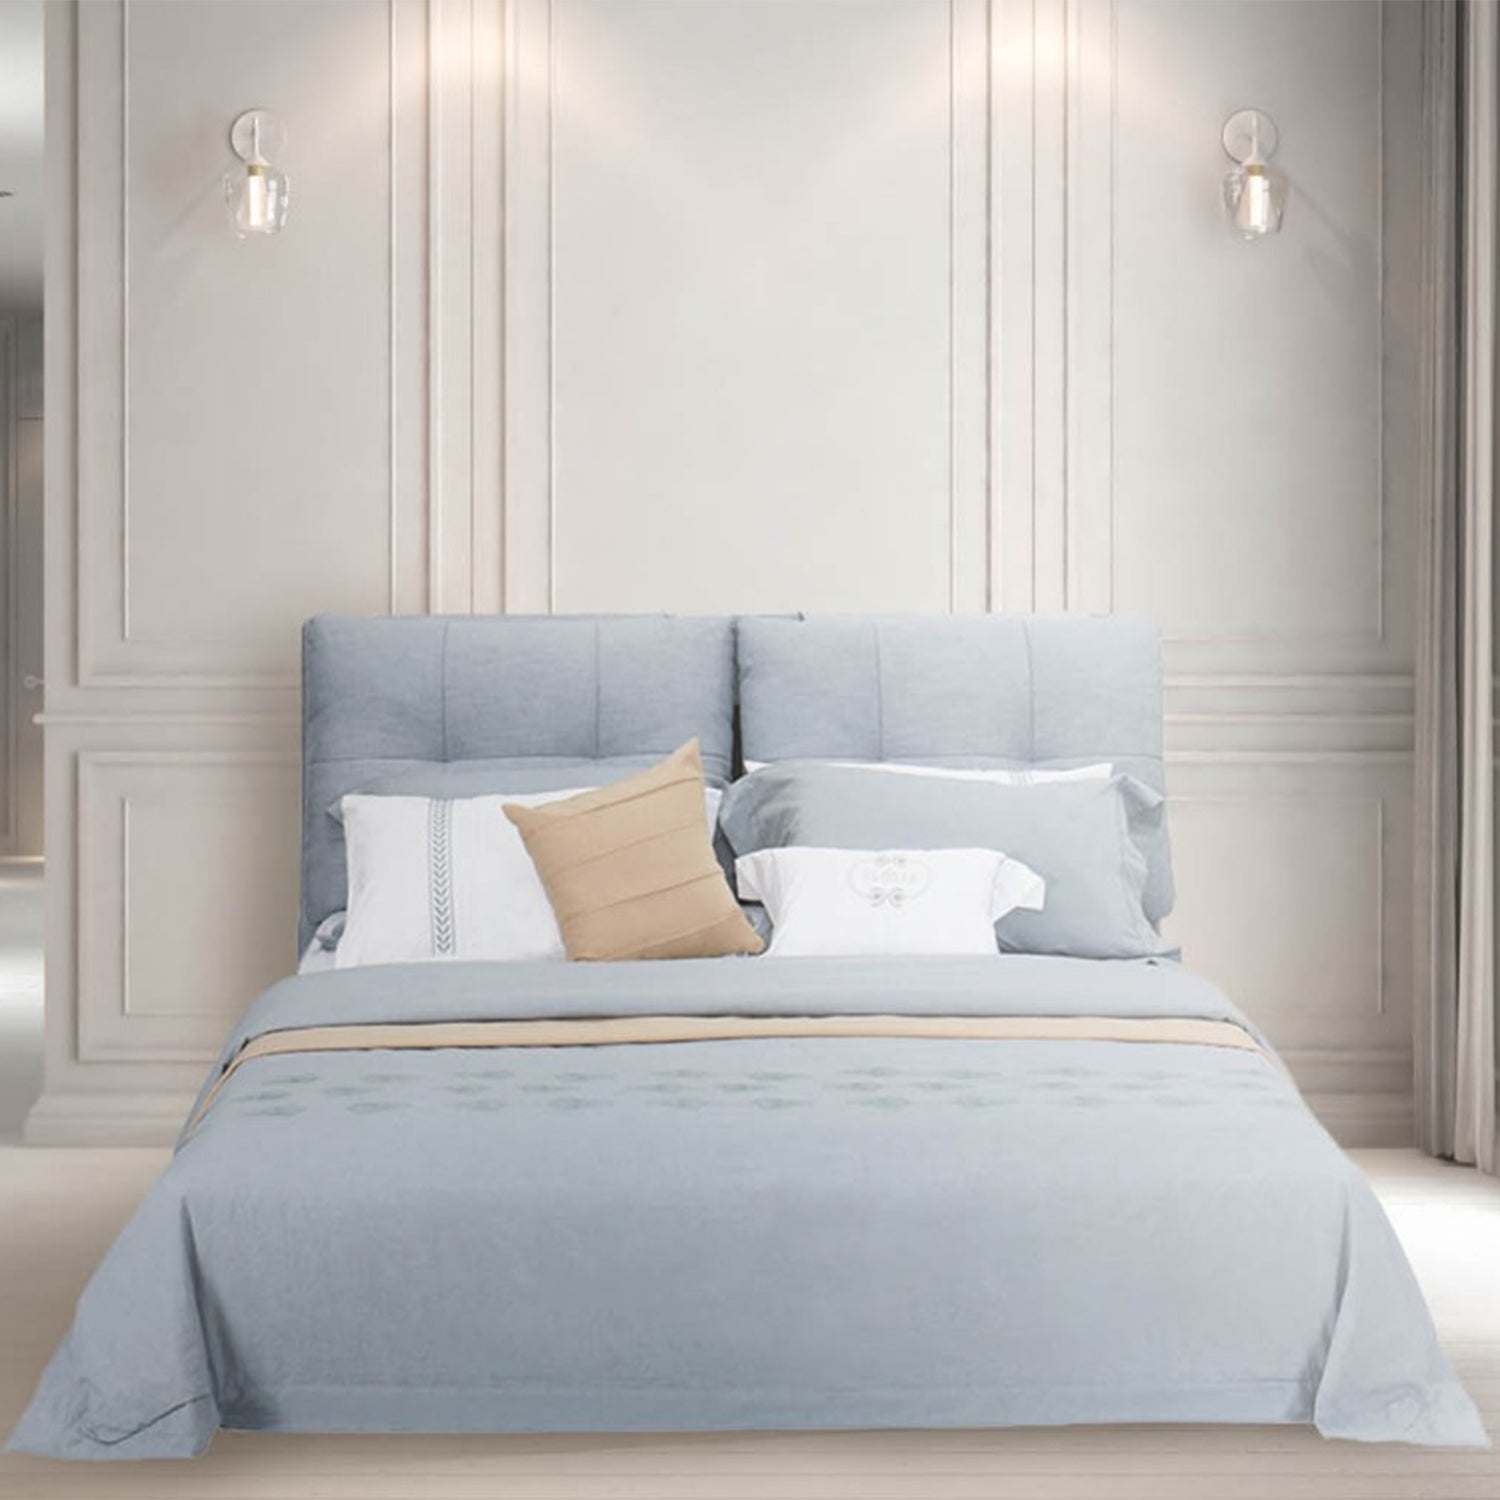 DeRUCCI Bed Frame BZZ4 - 285 with light blue and beige bedding and pillows, featuring a modern upholstered light blue headboard and white paneled wall background